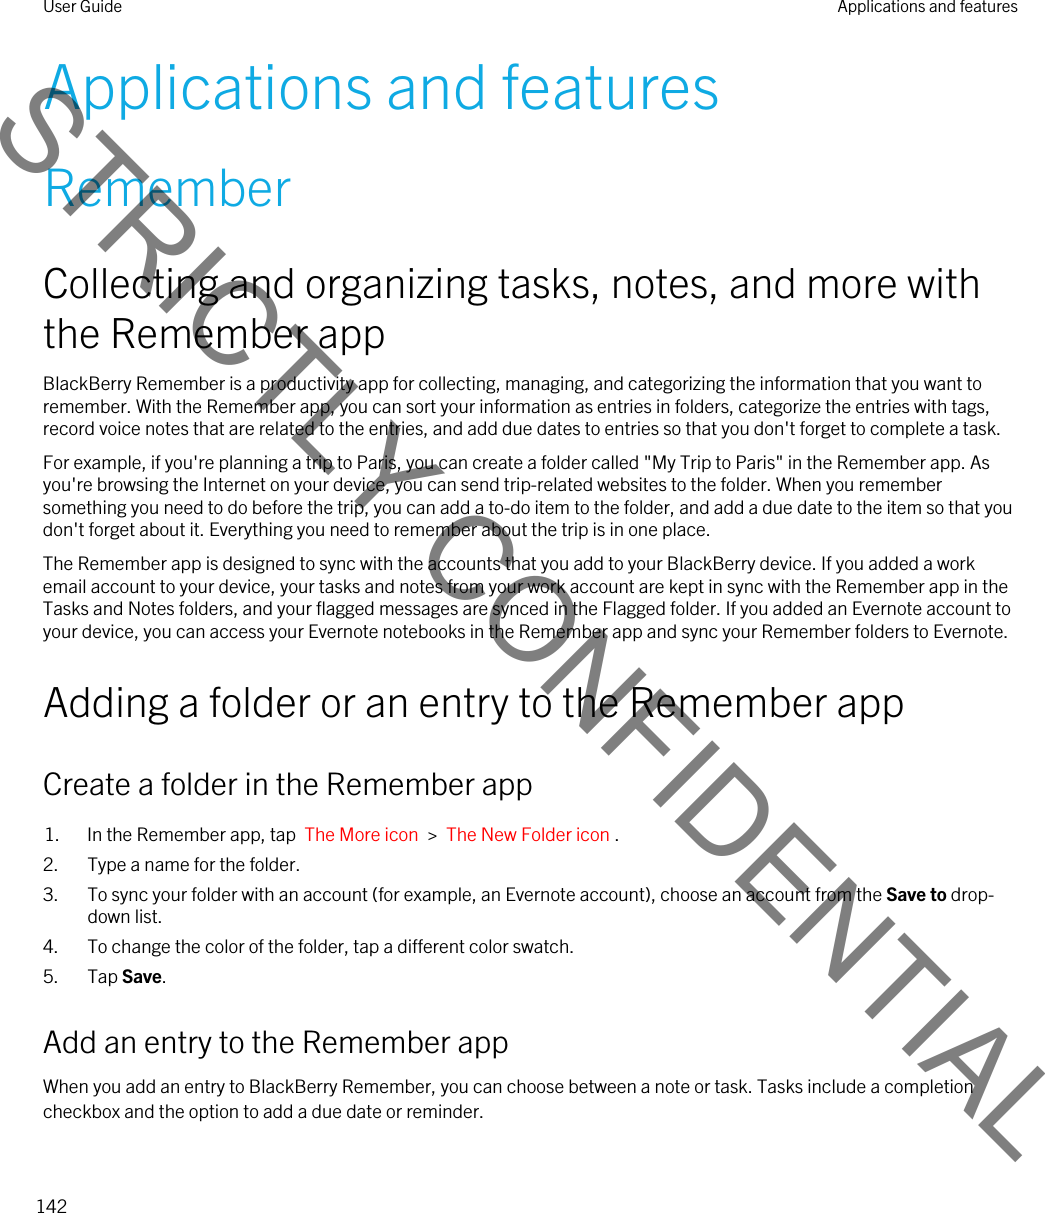 Applications and featuresRememberCollecting and organizing tasks, notes, and more with the Remember appBlackBerry Remember is a productivity app for collecting, managing, and categorizing the information that you want to remember. With the Remember app, you can sort your information as entries in folders, categorize the entries with tags, record voice notes that are related to the entries, and add due dates to entries so that you don&apos;t forget to complete a task.For example, if you&apos;re planning a trip to Paris, you can create a folder called &quot;My Trip to Paris&quot; in the Remember app. As you&apos;re browsing the Internet on your device, you can send trip-related websites to the folder. When you remember something you need to do before the trip, you can add a to-do item to the folder, and add a due date to the item so that you don&apos;t forget about it. Everything you need to remember about the trip is in one place.The Remember app is designed to sync with the accounts that you add to your BlackBerry device. If you added a work email account to your device, your tasks and notes from your work account are kept in sync with the Remember app in the Tasks and Notes folders, and your flagged messages are synced in the Flagged folder. If you added an Evernote account to your device, you can access your Evernote notebooks in the Remember app and sync your Remember folders to Evernote.Adding a folder or an entry to the Remember appCreate a folder in the Remember app1. In the Remember app, tap  The More icon  &gt;  The New Folder icon .2. Type a name for the folder.3. To sync your folder with an account (for example, an Evernote account), choose an account from the Save to drop-down list.4. To change the color of the folder, tap a different color swatch.5. Tap Save.Add an entry to the Remember appWhen you add an entry to BlackBerry Remember, you can choose between a note or task. Tasks include a completion checkbox and the option to add a due date or reminder.User Guide Applications and features142STRICTLY CONFIDENTIAL